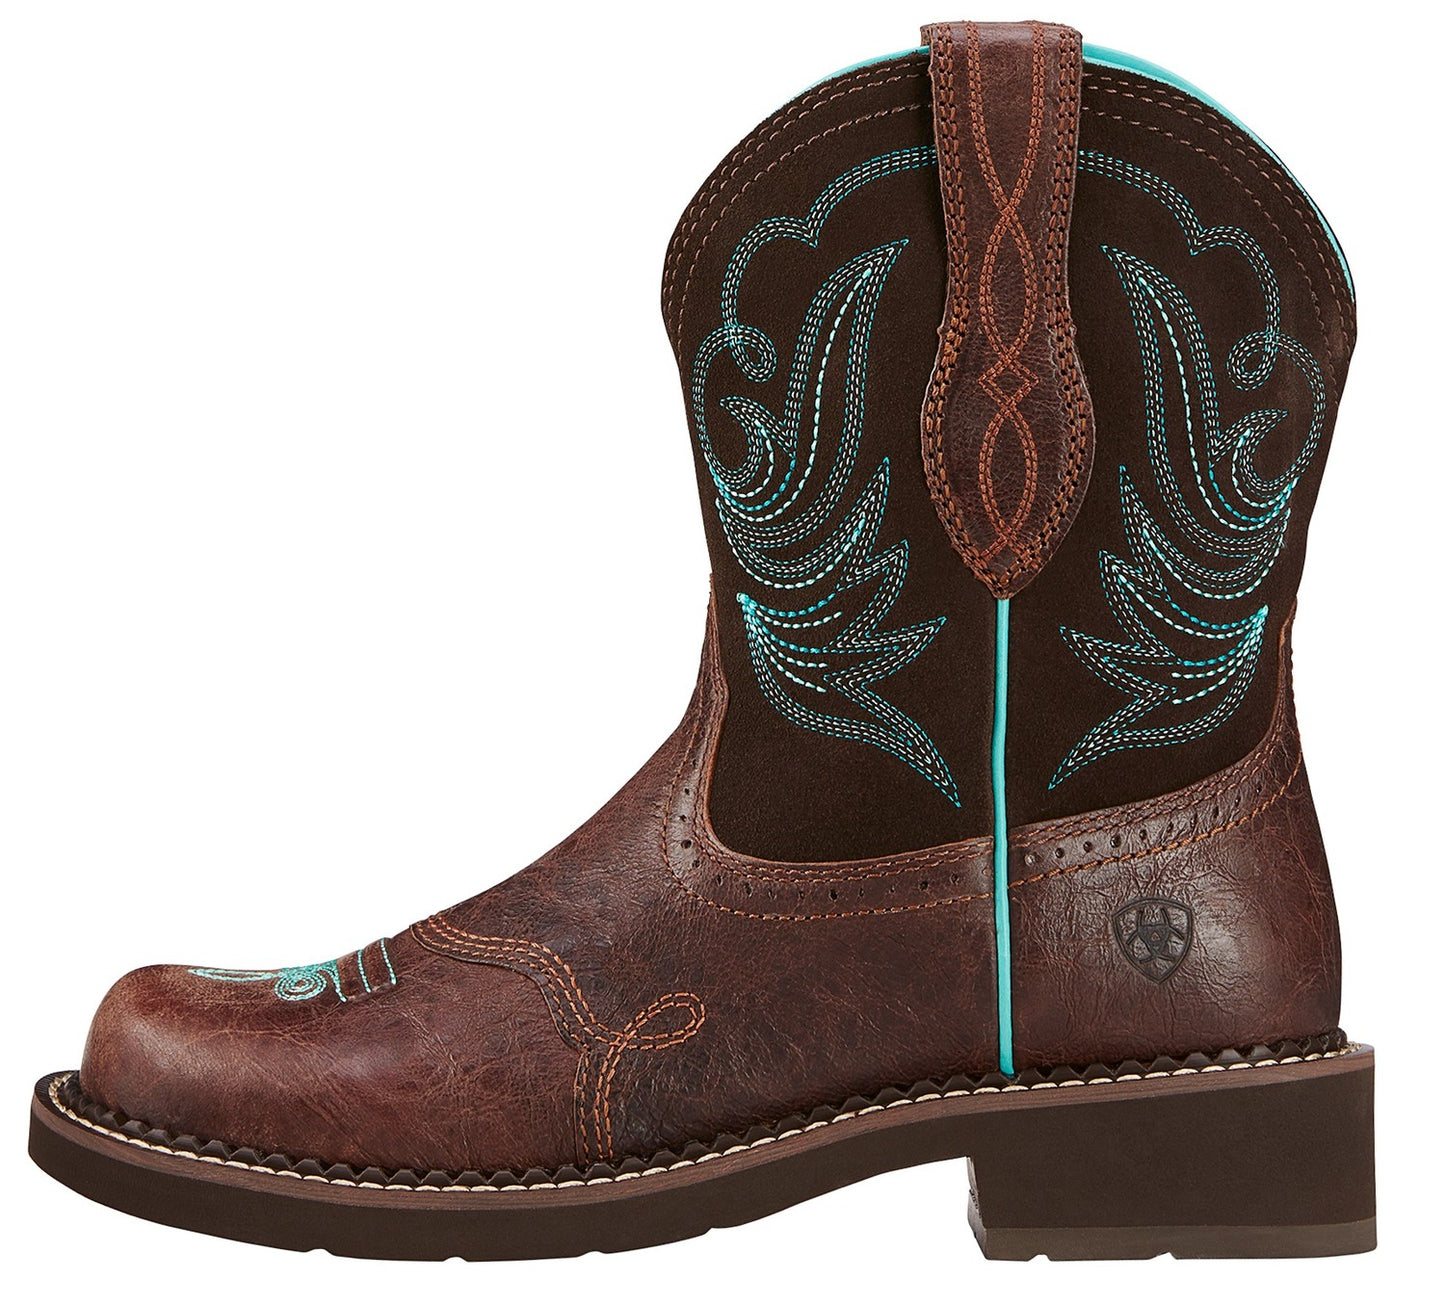 Ariat® Women's Fatbaby Heritage Drapper Western Boots